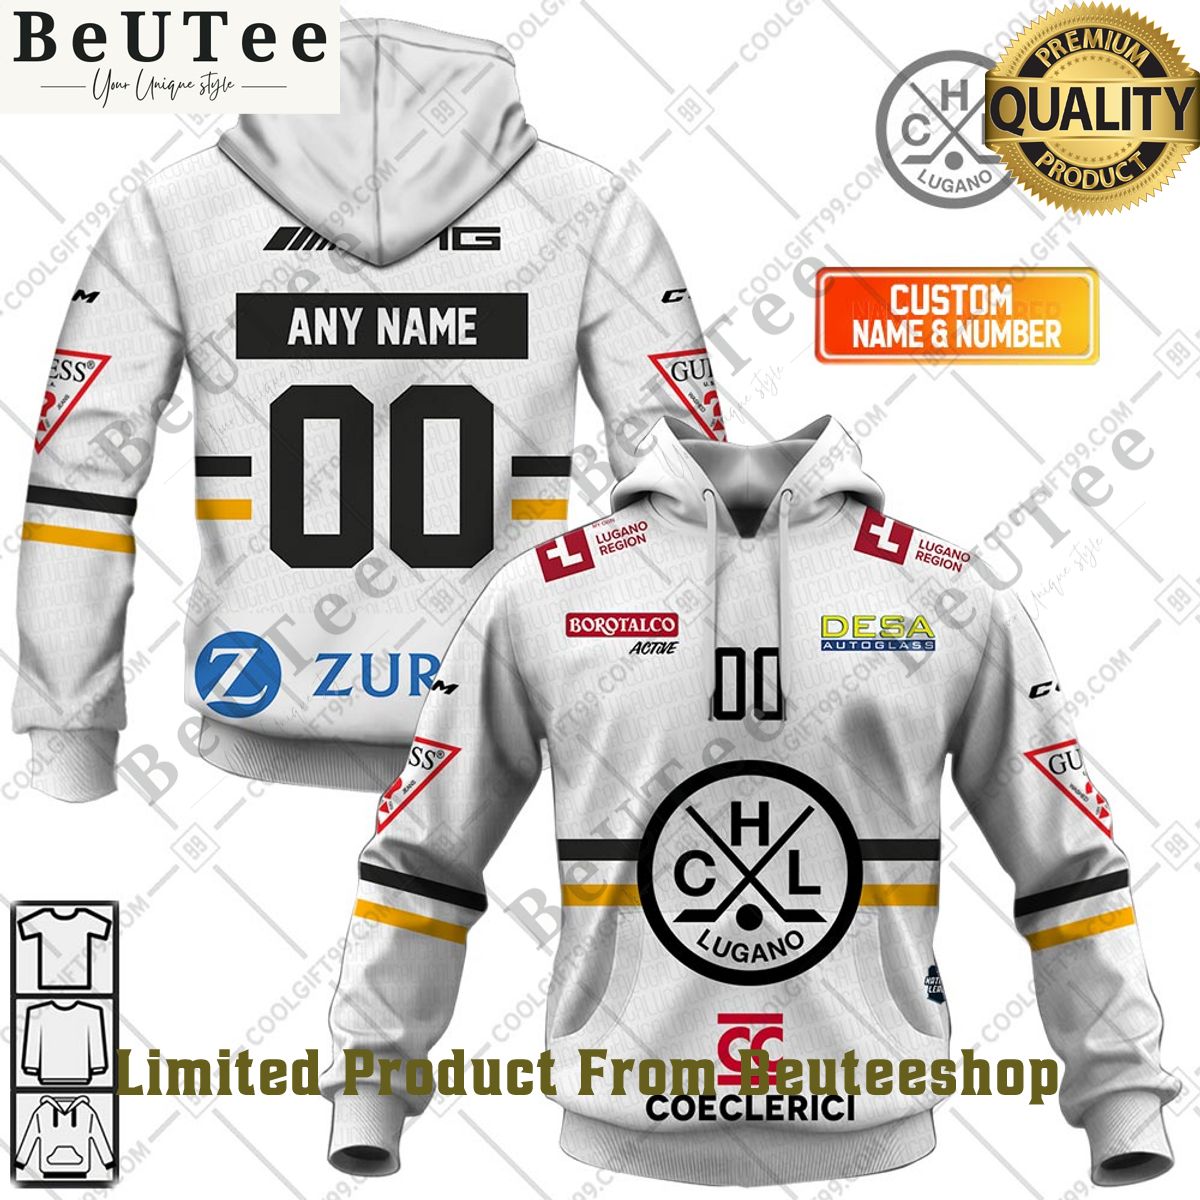 personalized name and number nl hockey hc lugano away jersey style printed hoodie shirt 1 CfJjx.jpg